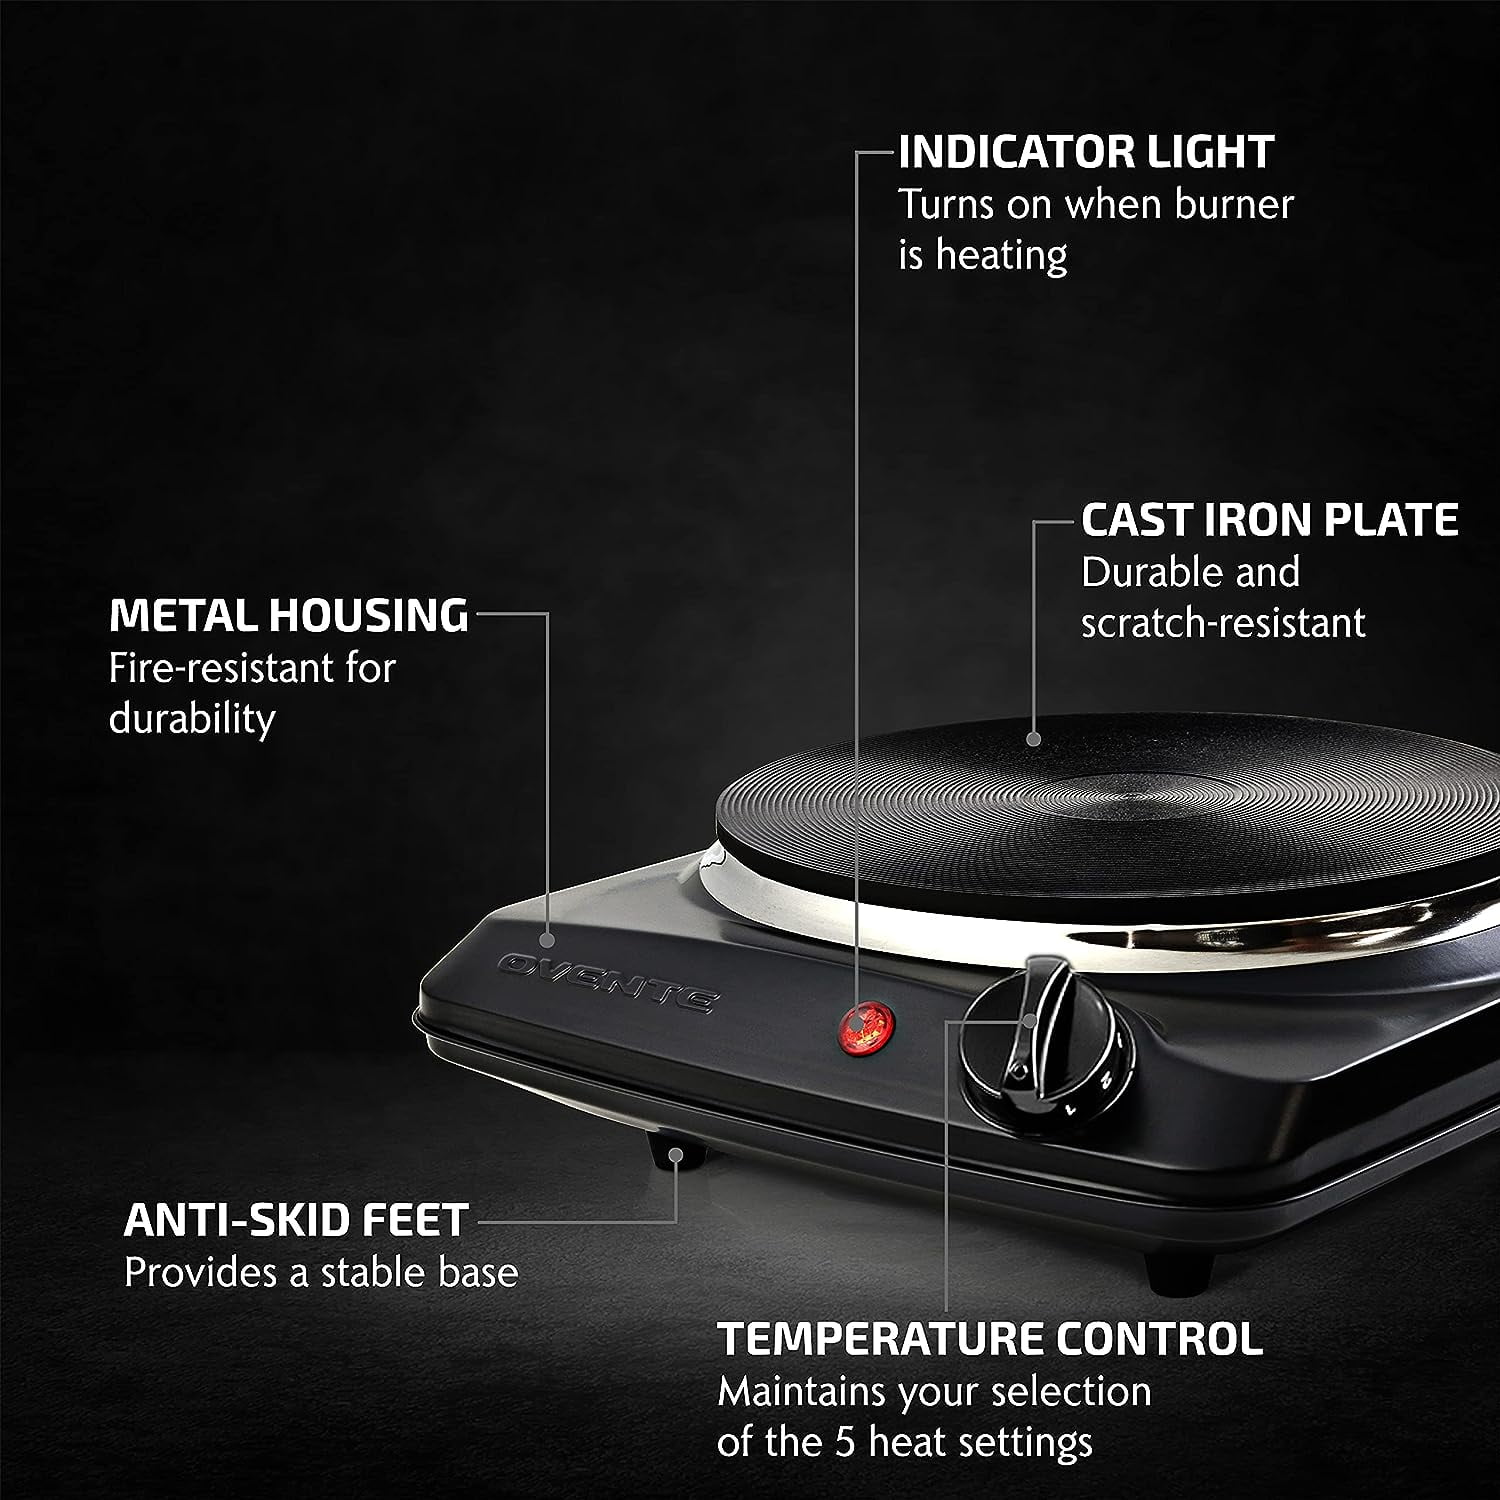 Portable 1000W Single Electric Burner Hot Plate 5 Level Adjustable Temperature 110V Camping Dorm Heating Cooking Stove Stainless Steel, Size: 8.3 x